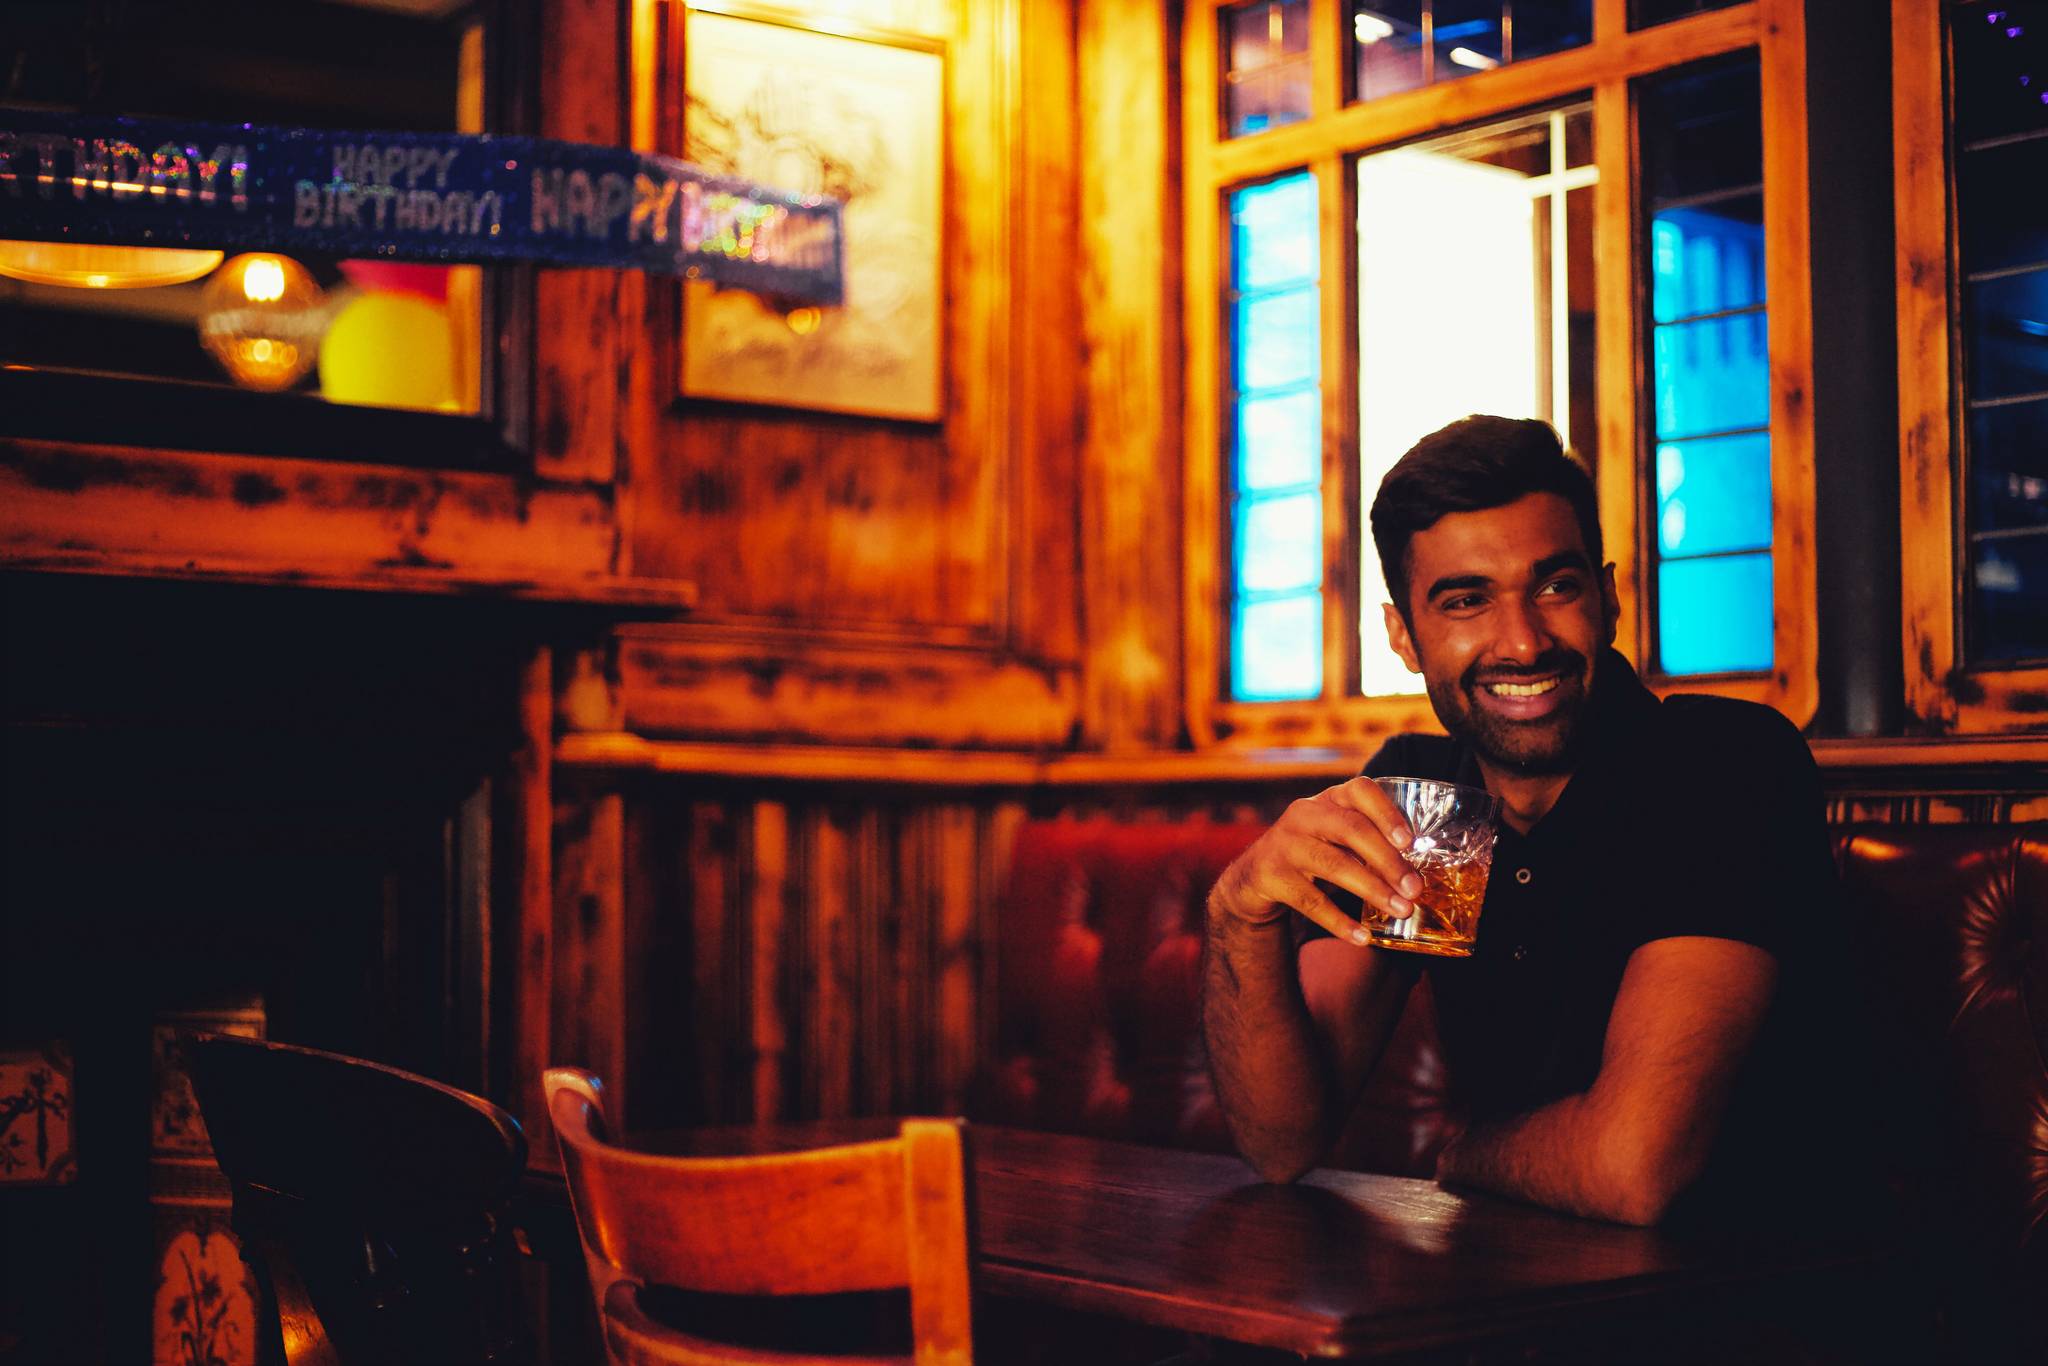 How whisky is attracting new fans in India and China